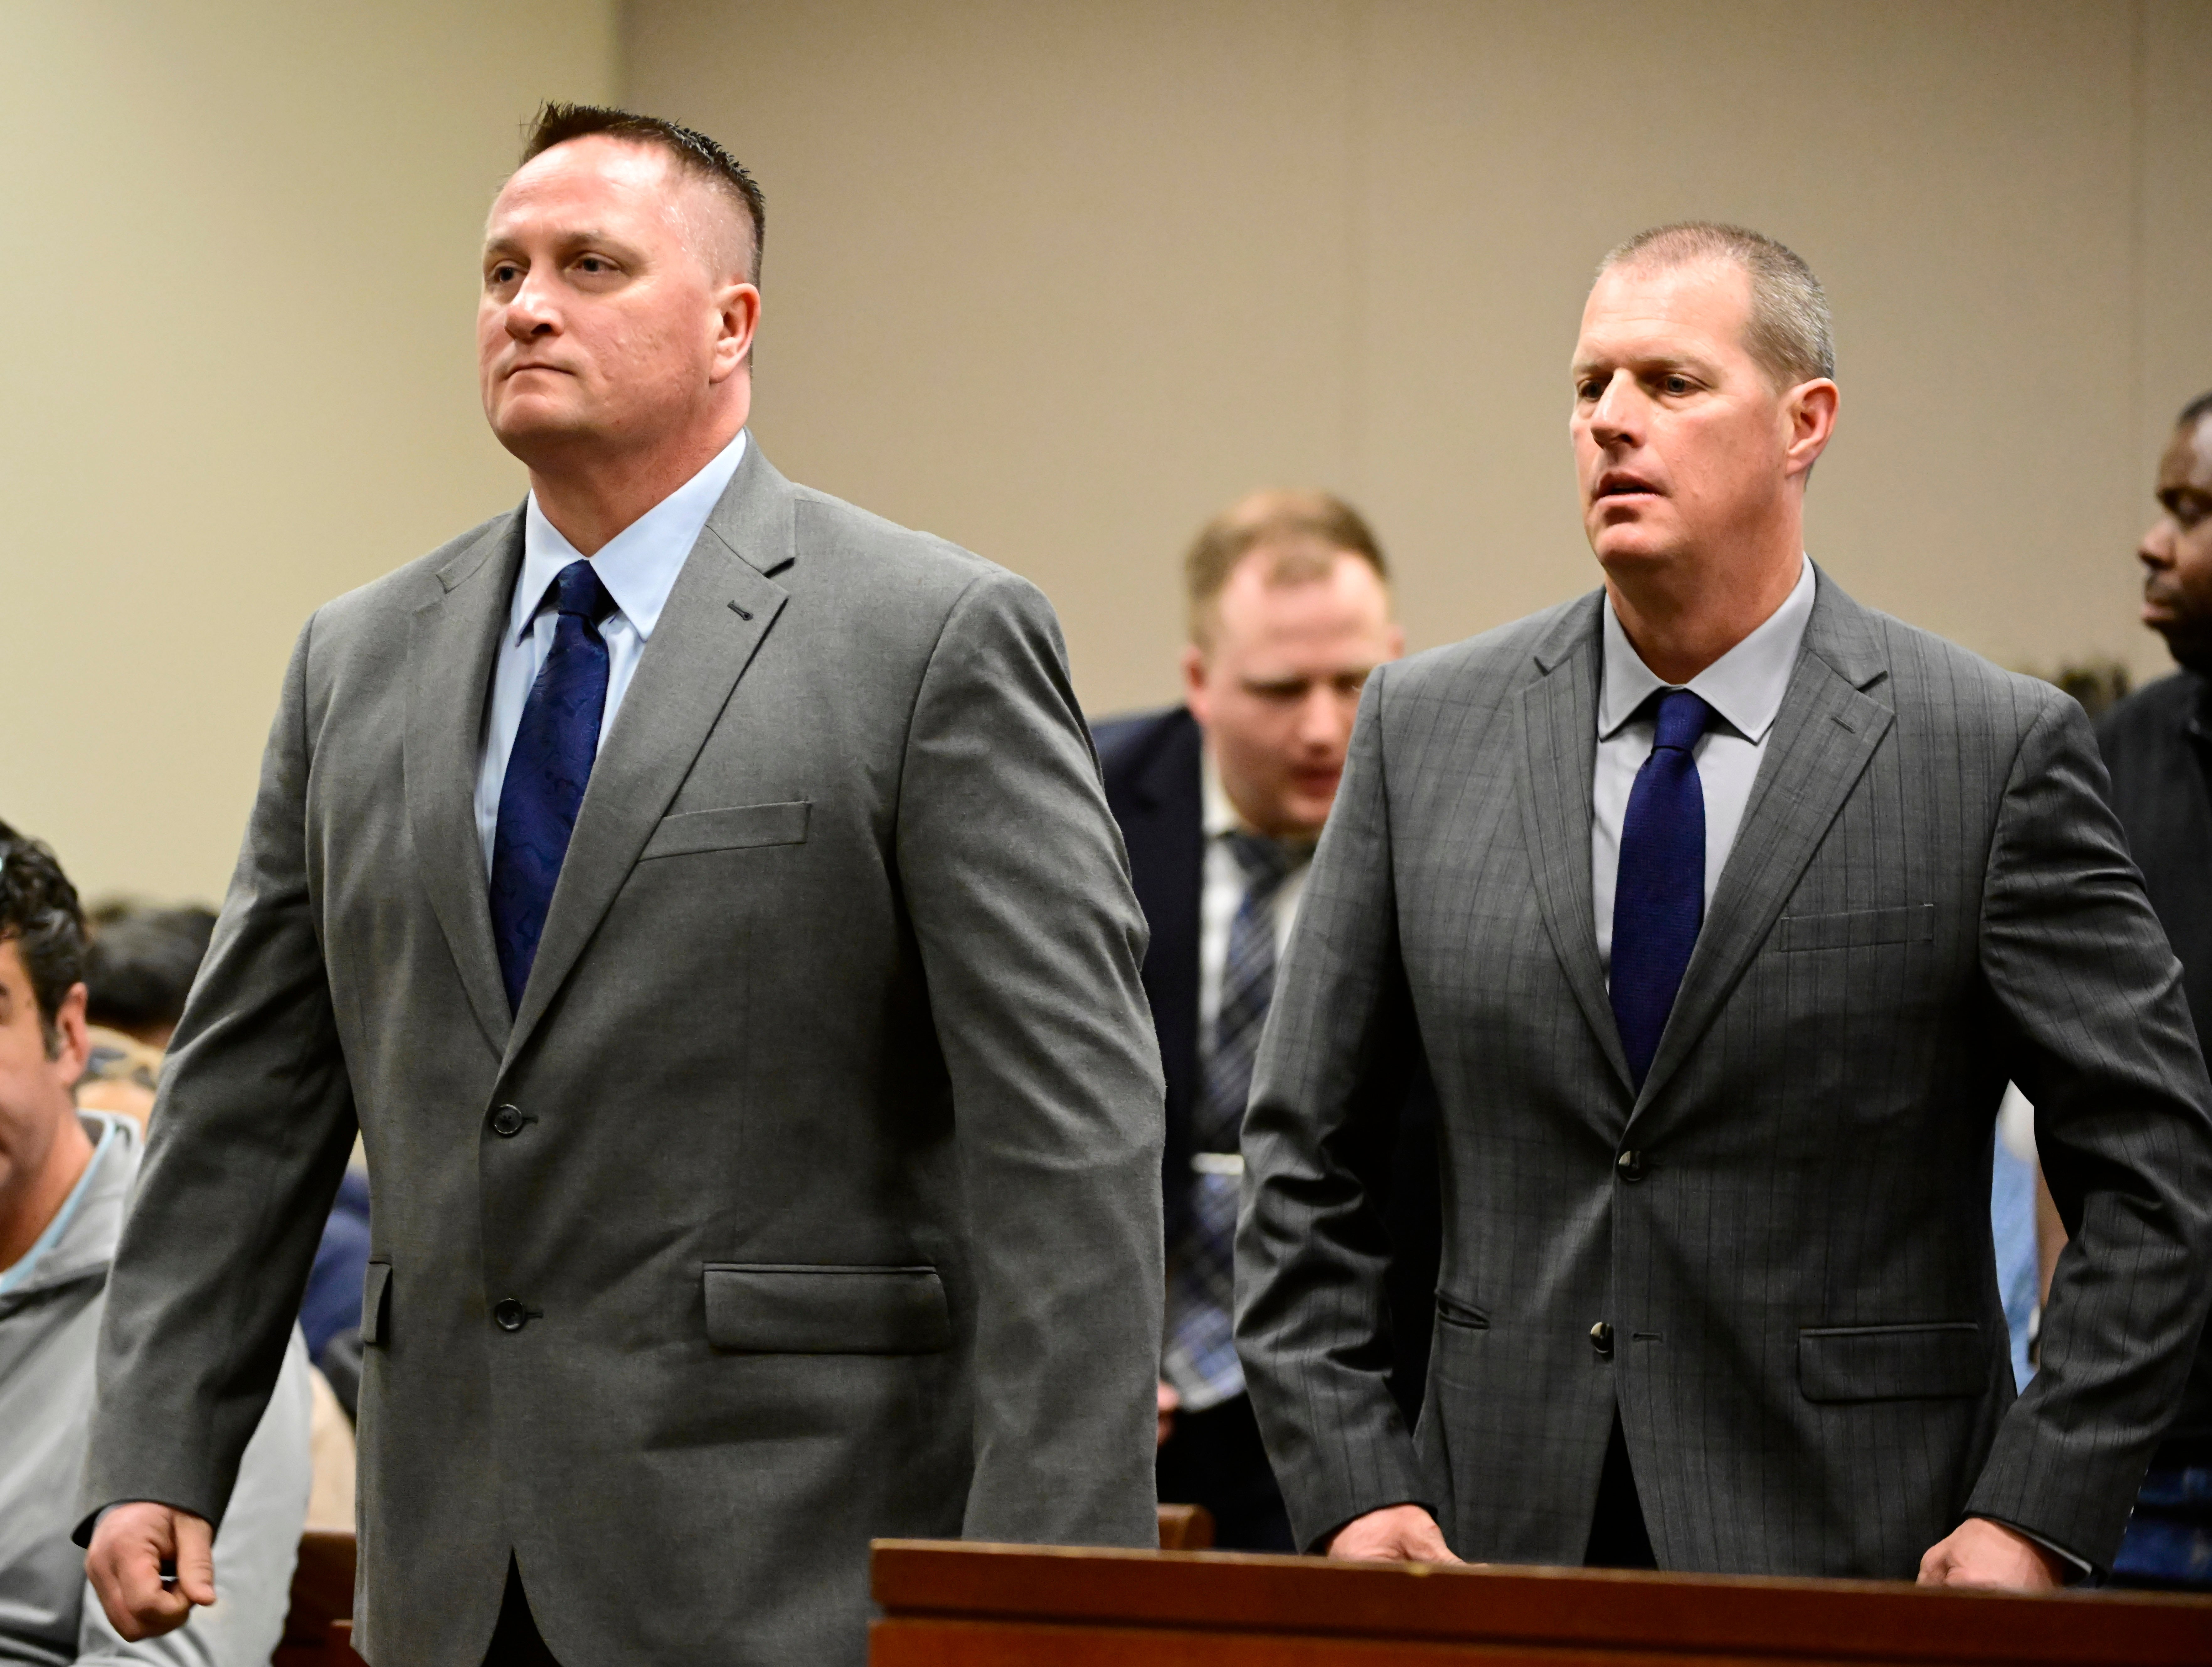 Paramedics Jeremy Cooper, left, and Peter Cichuniec attend an arraignment at the Adams County Justice Center in Brighton, Colorado in January 2023